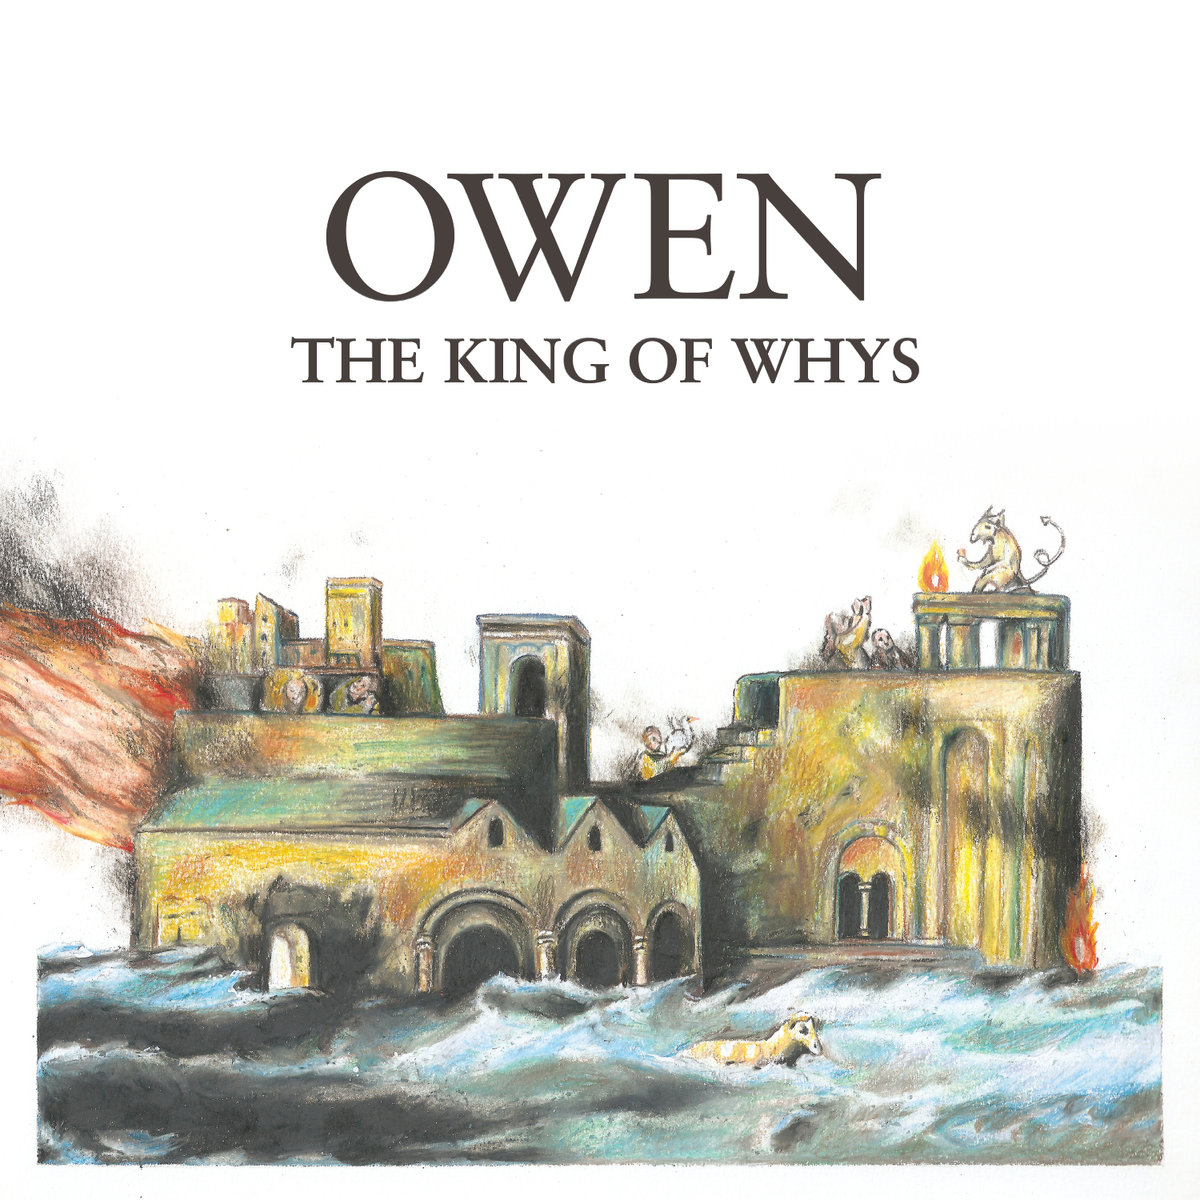 Owen The King of Whys